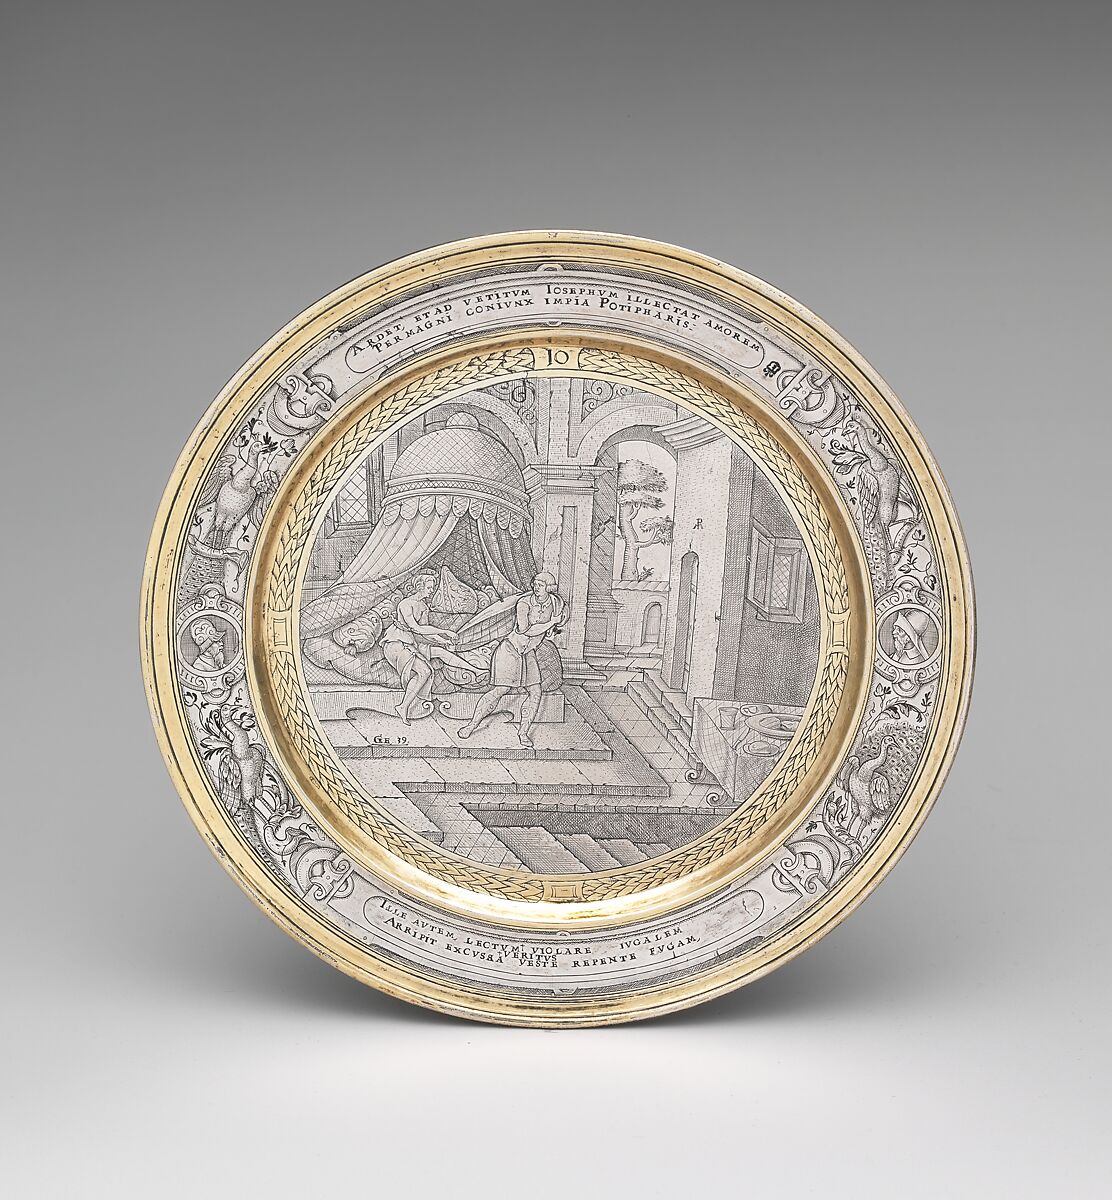 Joseph and Potiphar's wife, Possibly engraved by P.M., Silver, partly gilded, probably British 